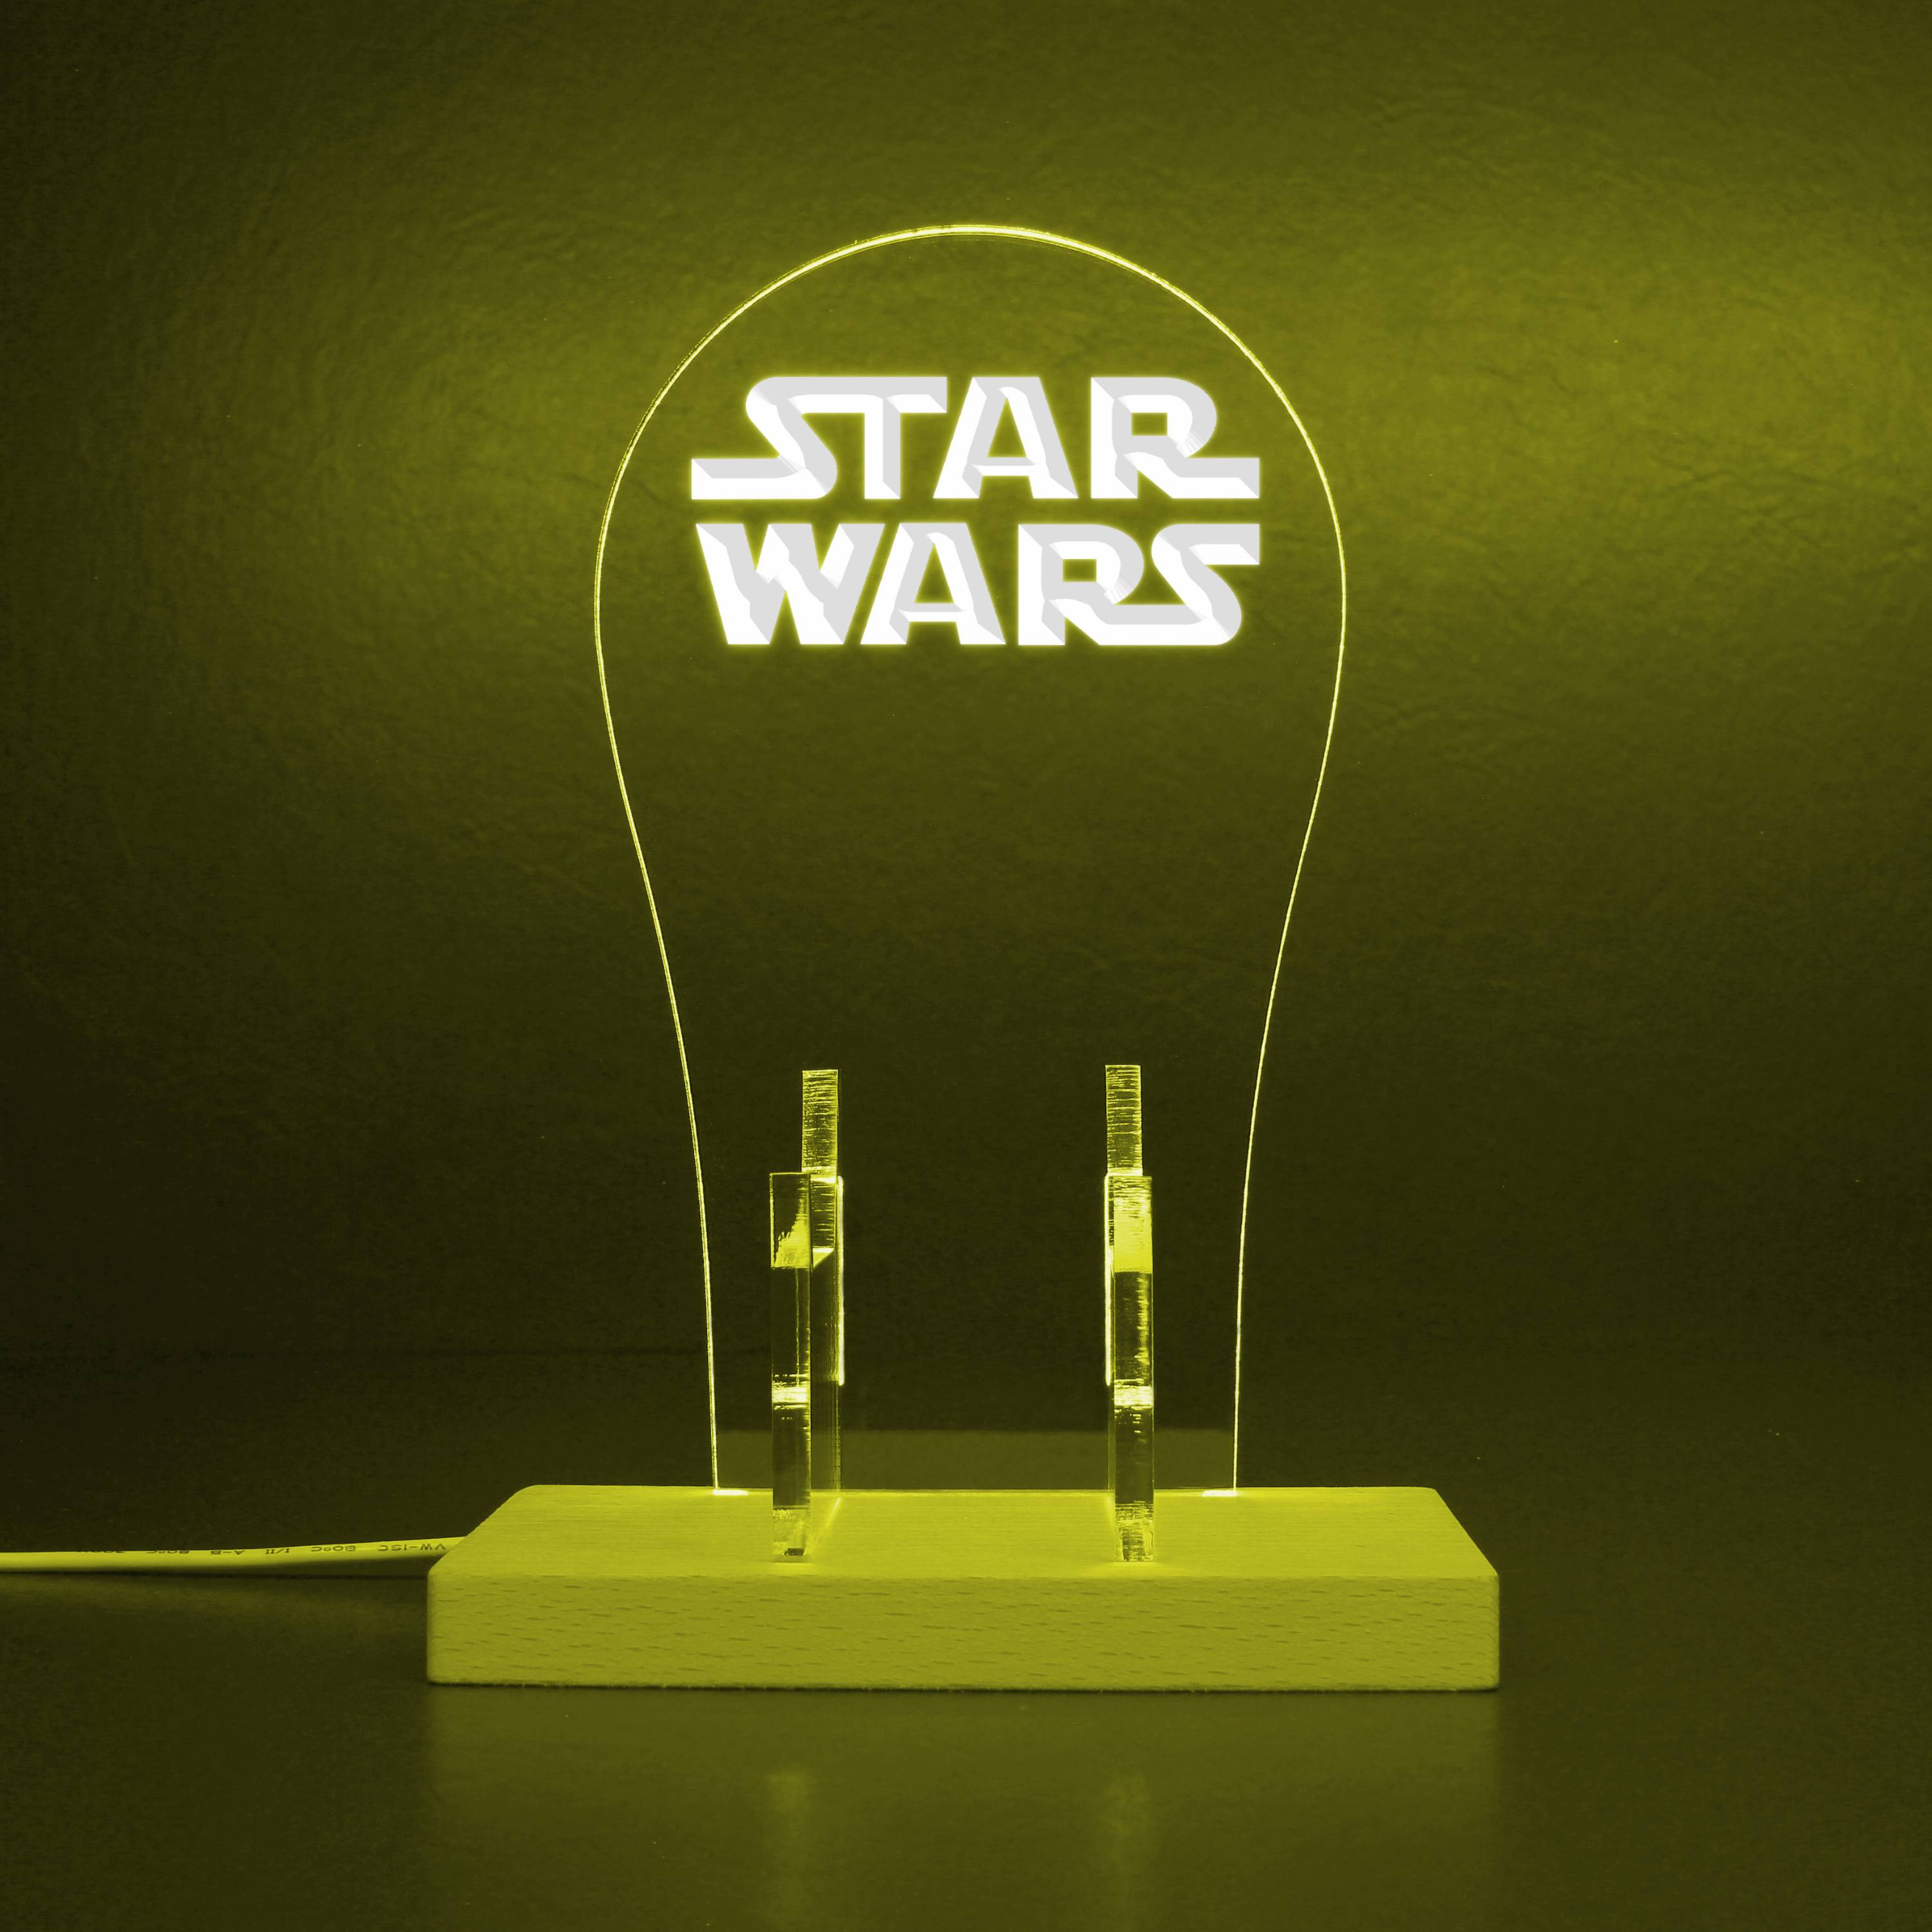 Star Wars LED Gaming Headset Controller Stand